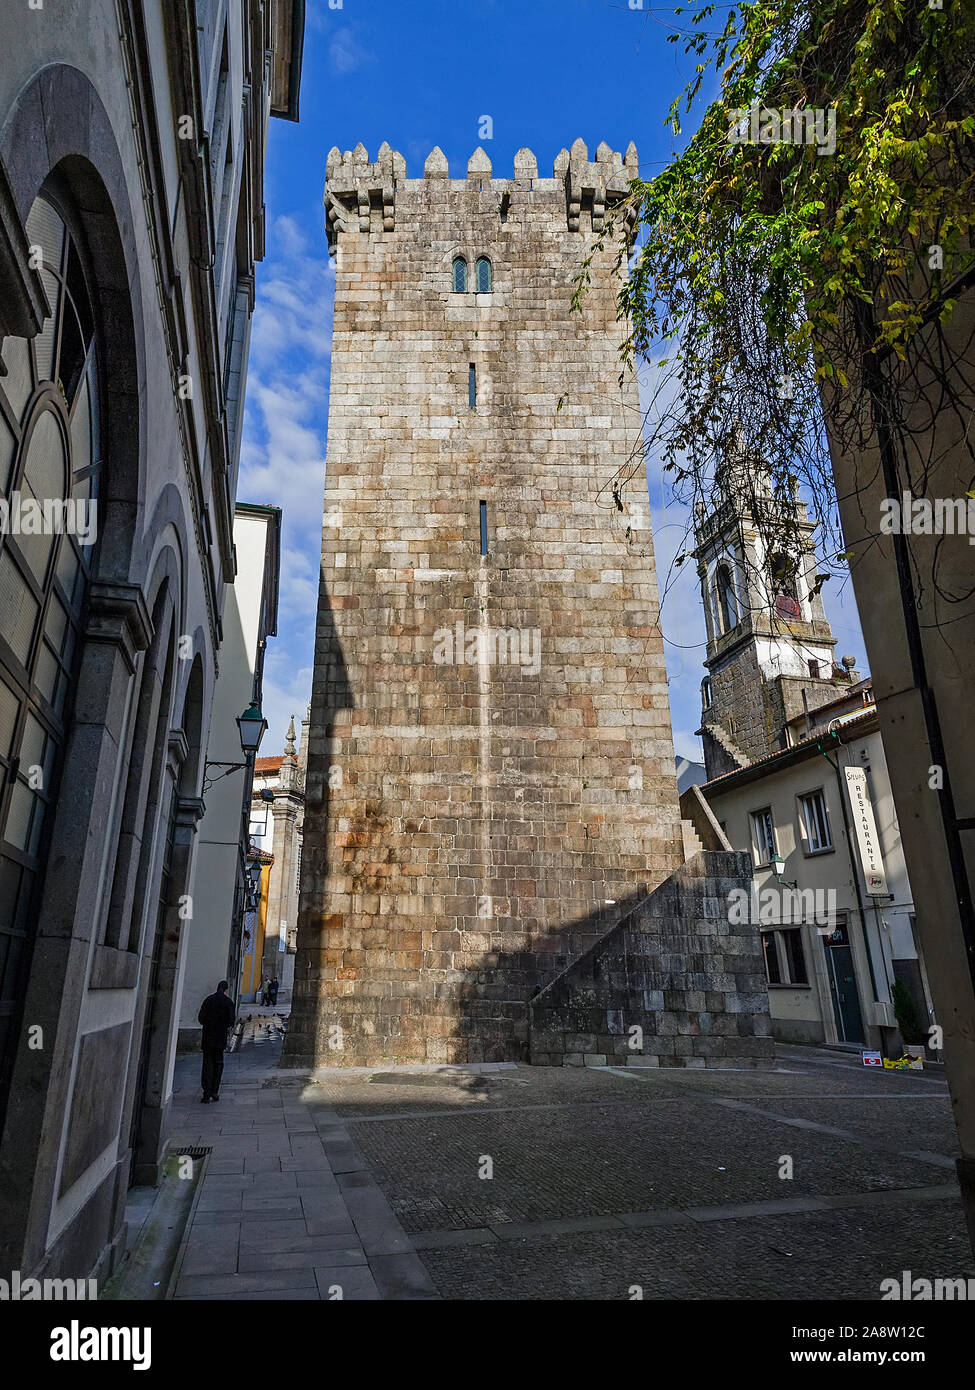 Watchtower or keep of Braga castle. The remaining of the castle and citadel demolished in the beginning of the 20th century. Portugal Stock Photo